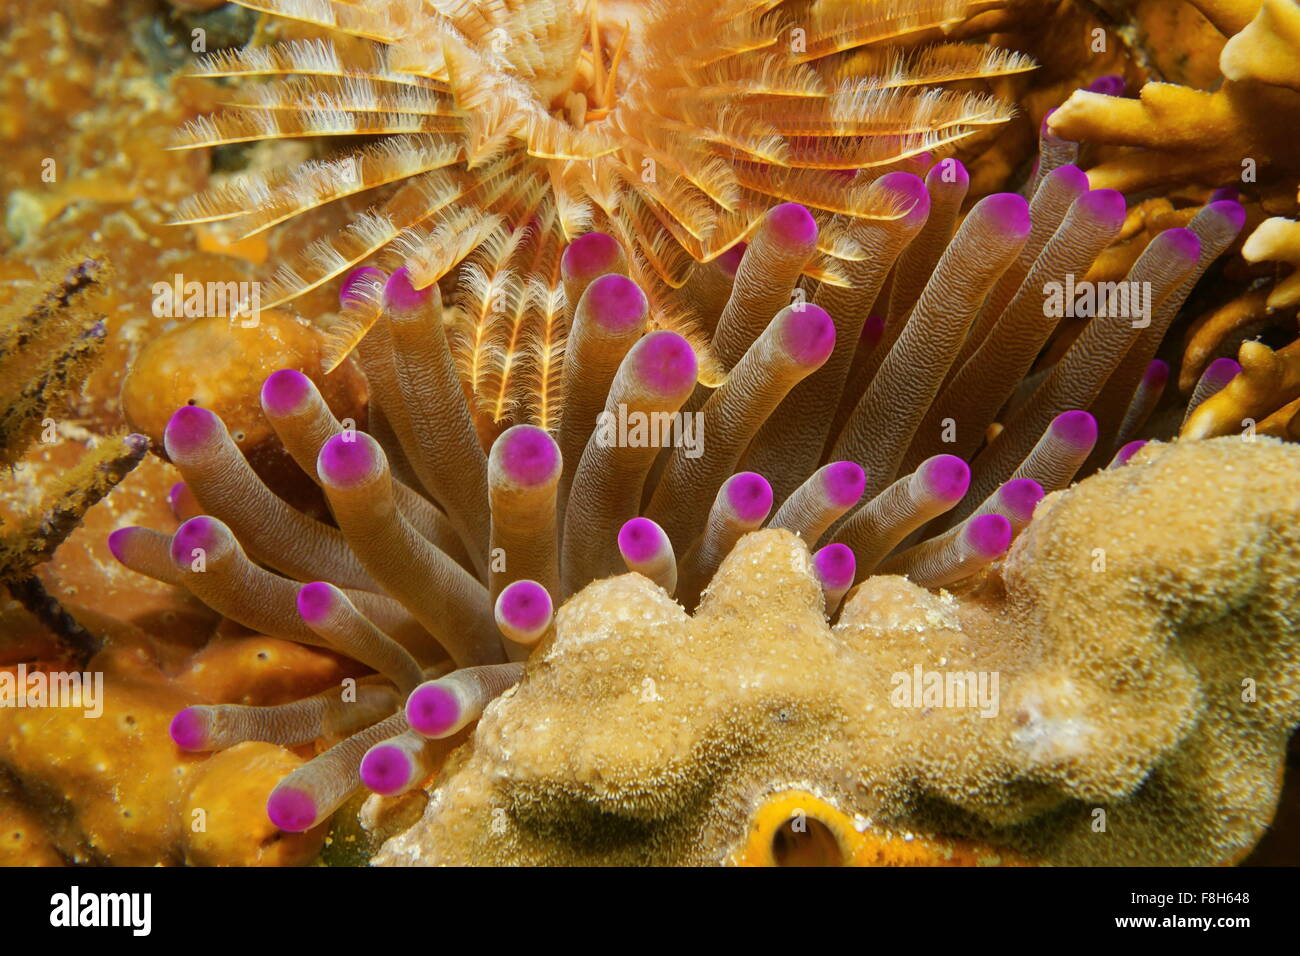 Tentacles of giant anemone underwater between coral and a feather duster worm, Caribbean sea, Mexico Stock Photo